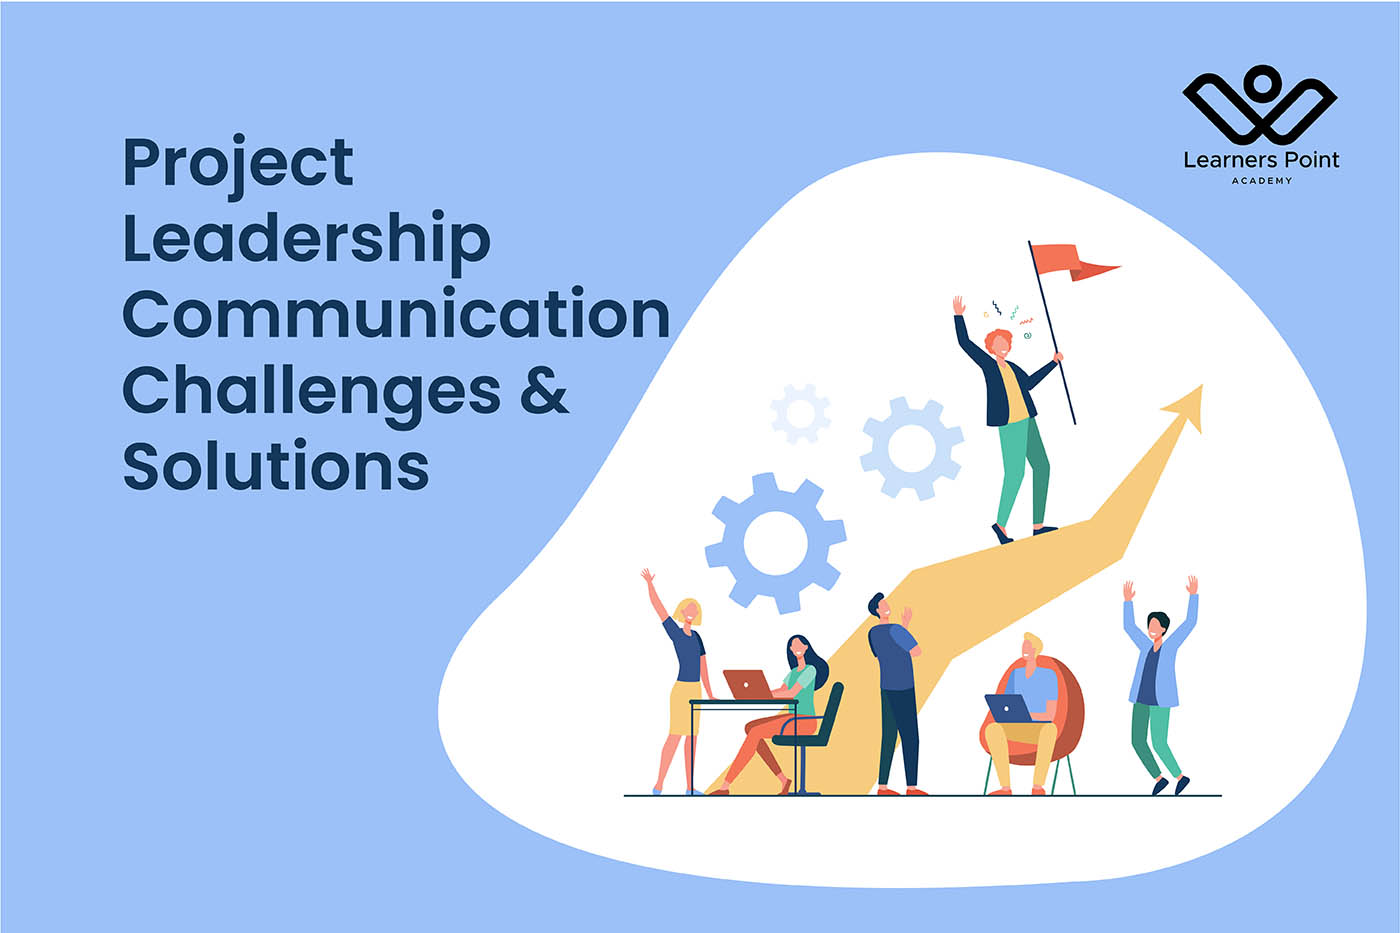 Project Leadership Communication Challenges & Solutions